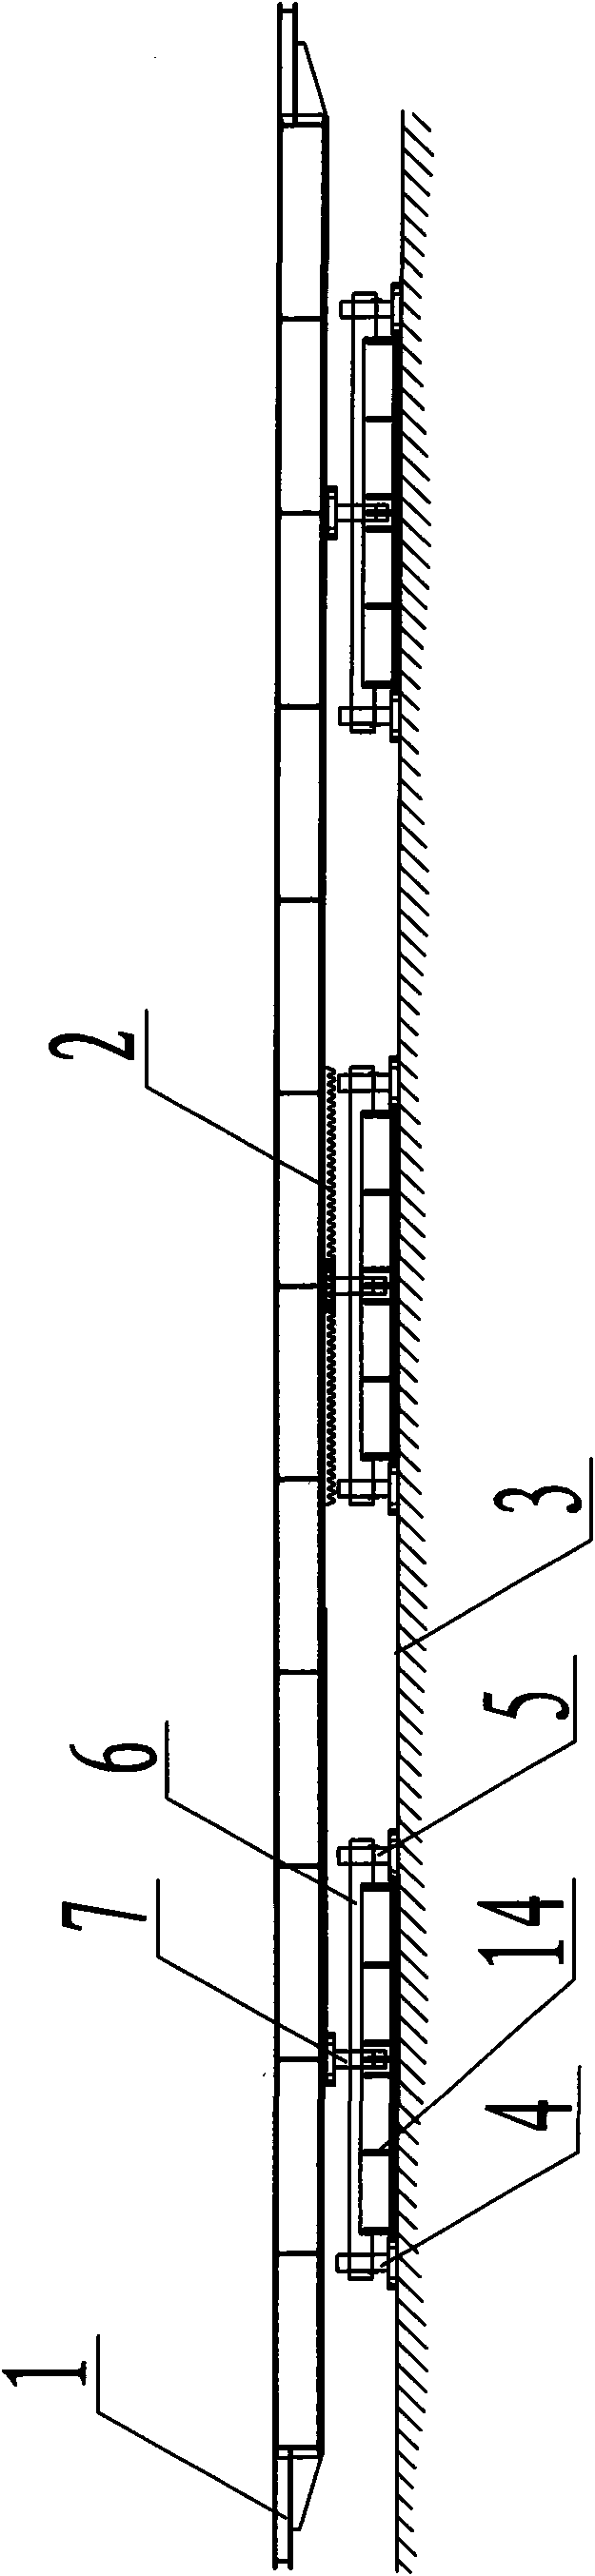 Quenched coke receiving slot translating and laterally turning-over device